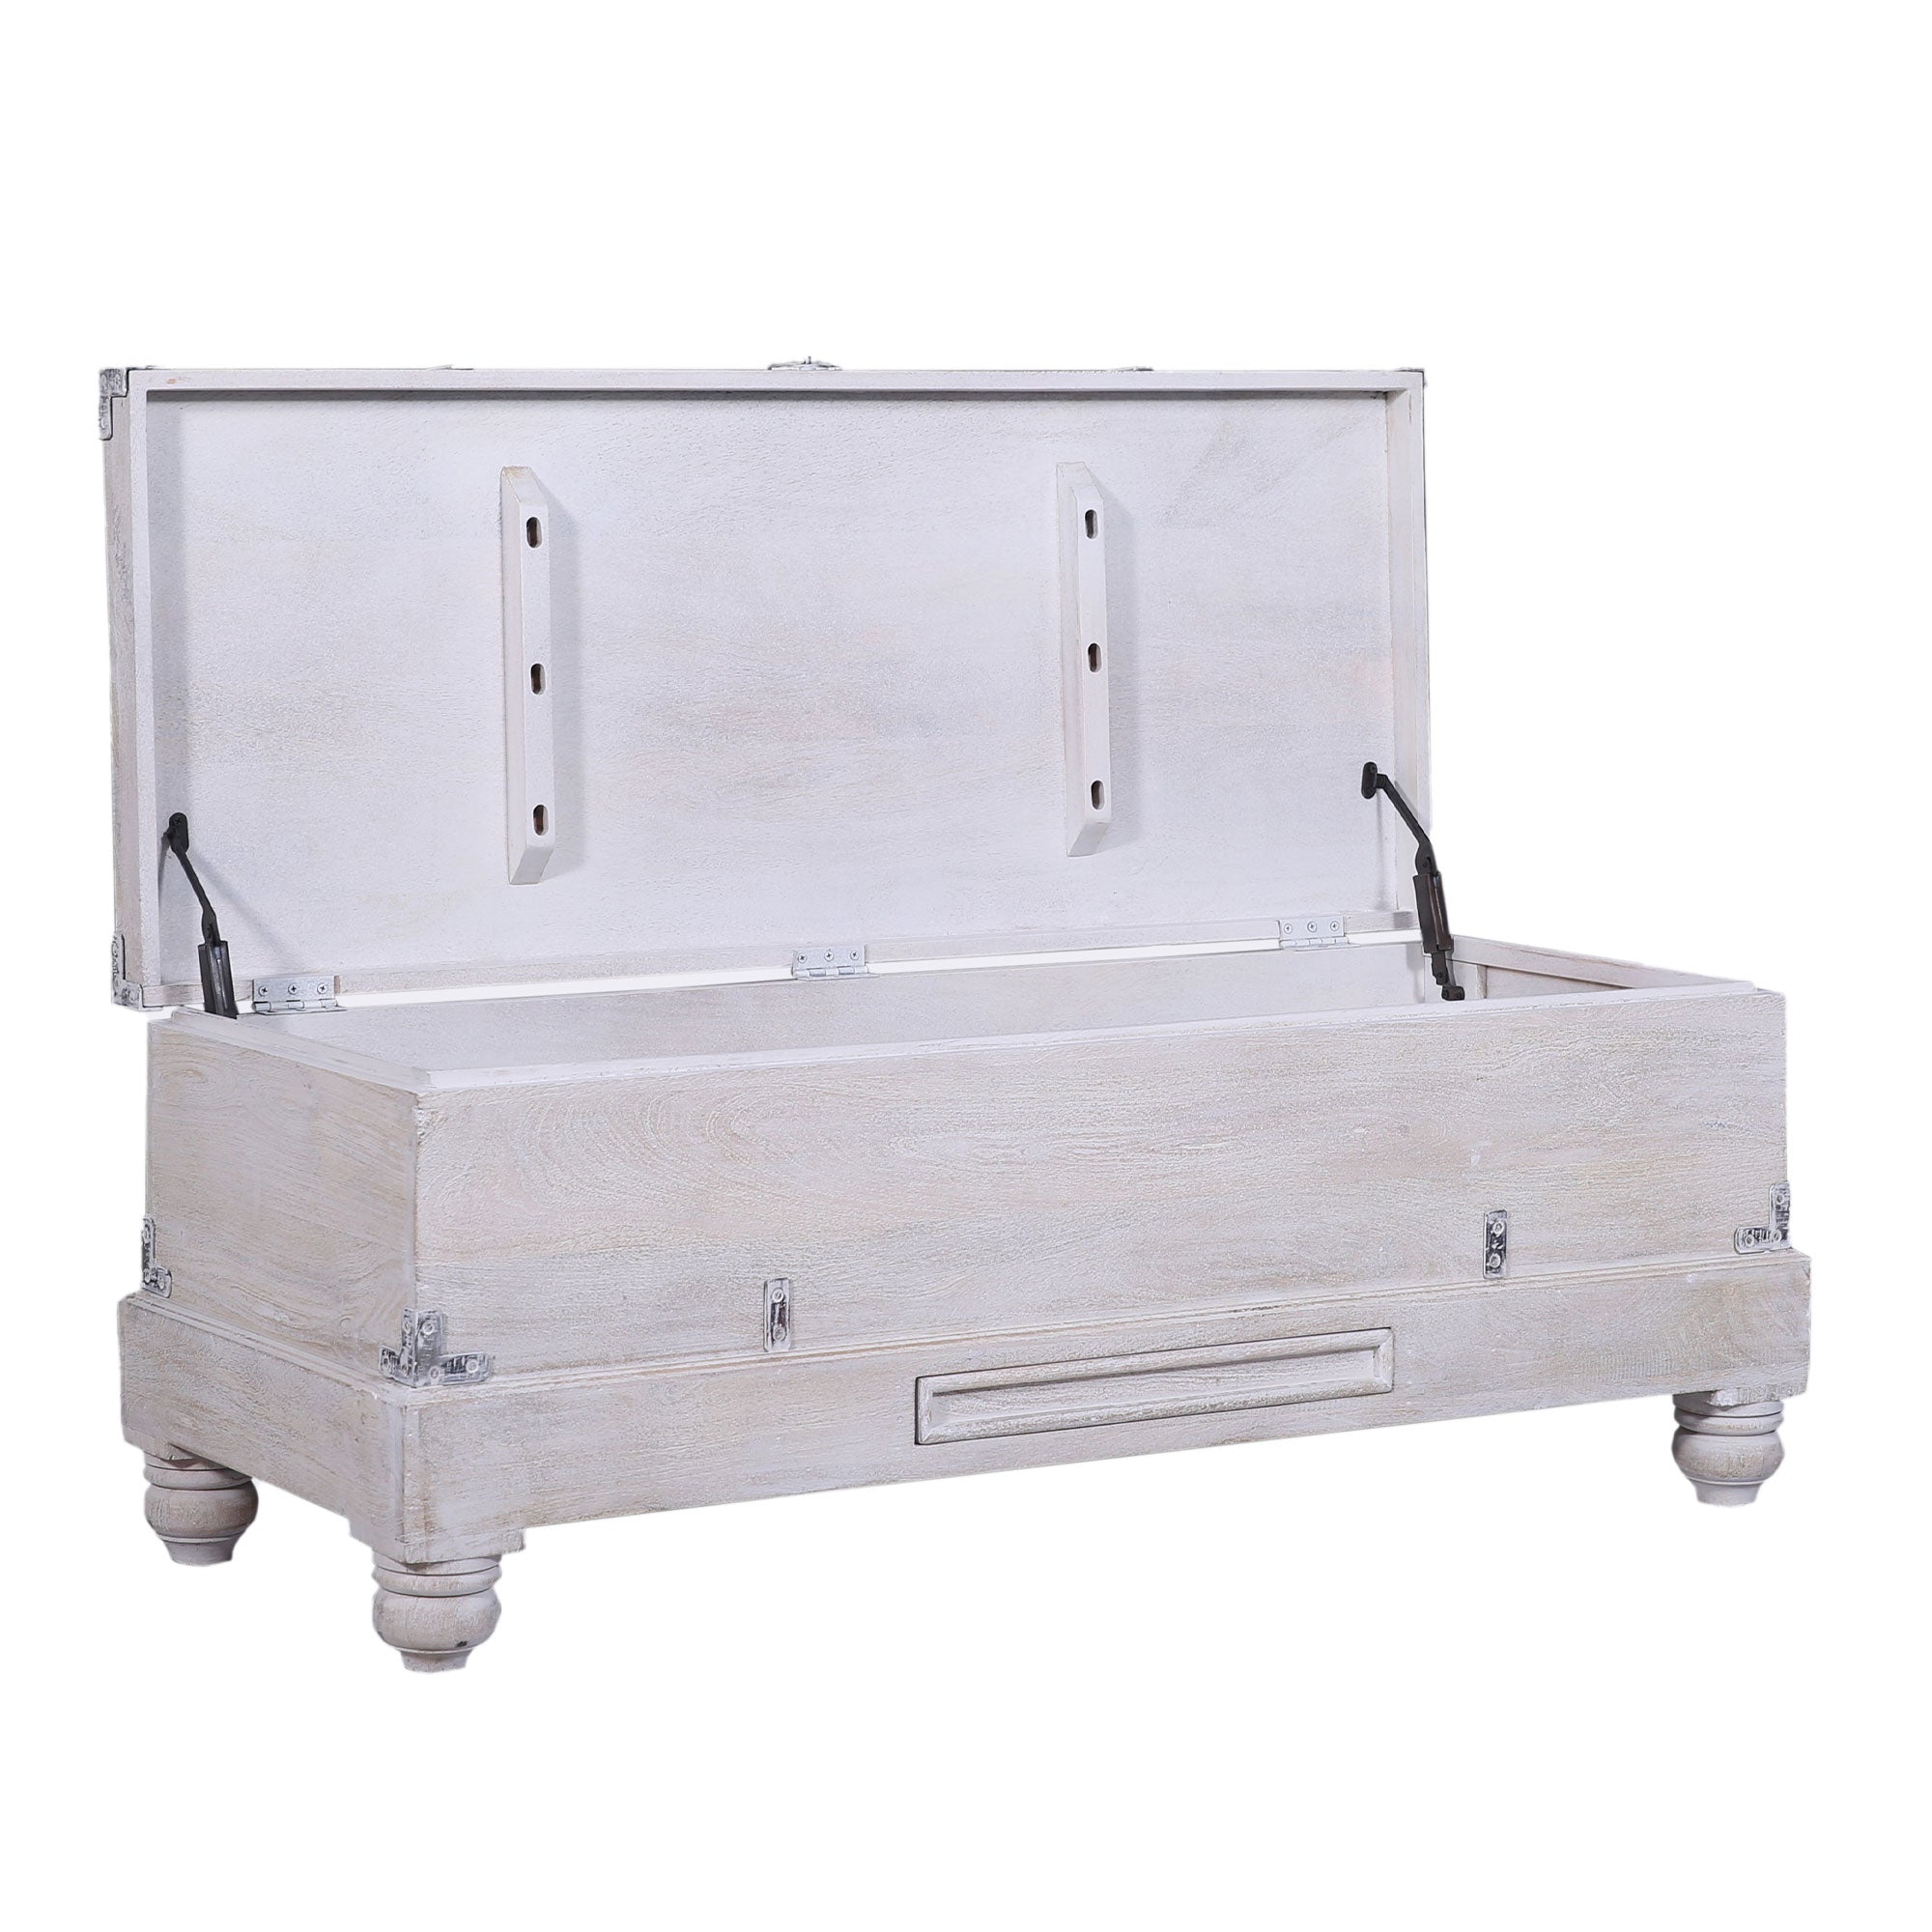 Nerio Nomad Wooden Storage Bench in White Distressed Finish in Ottomans & Benches by VMInnovations